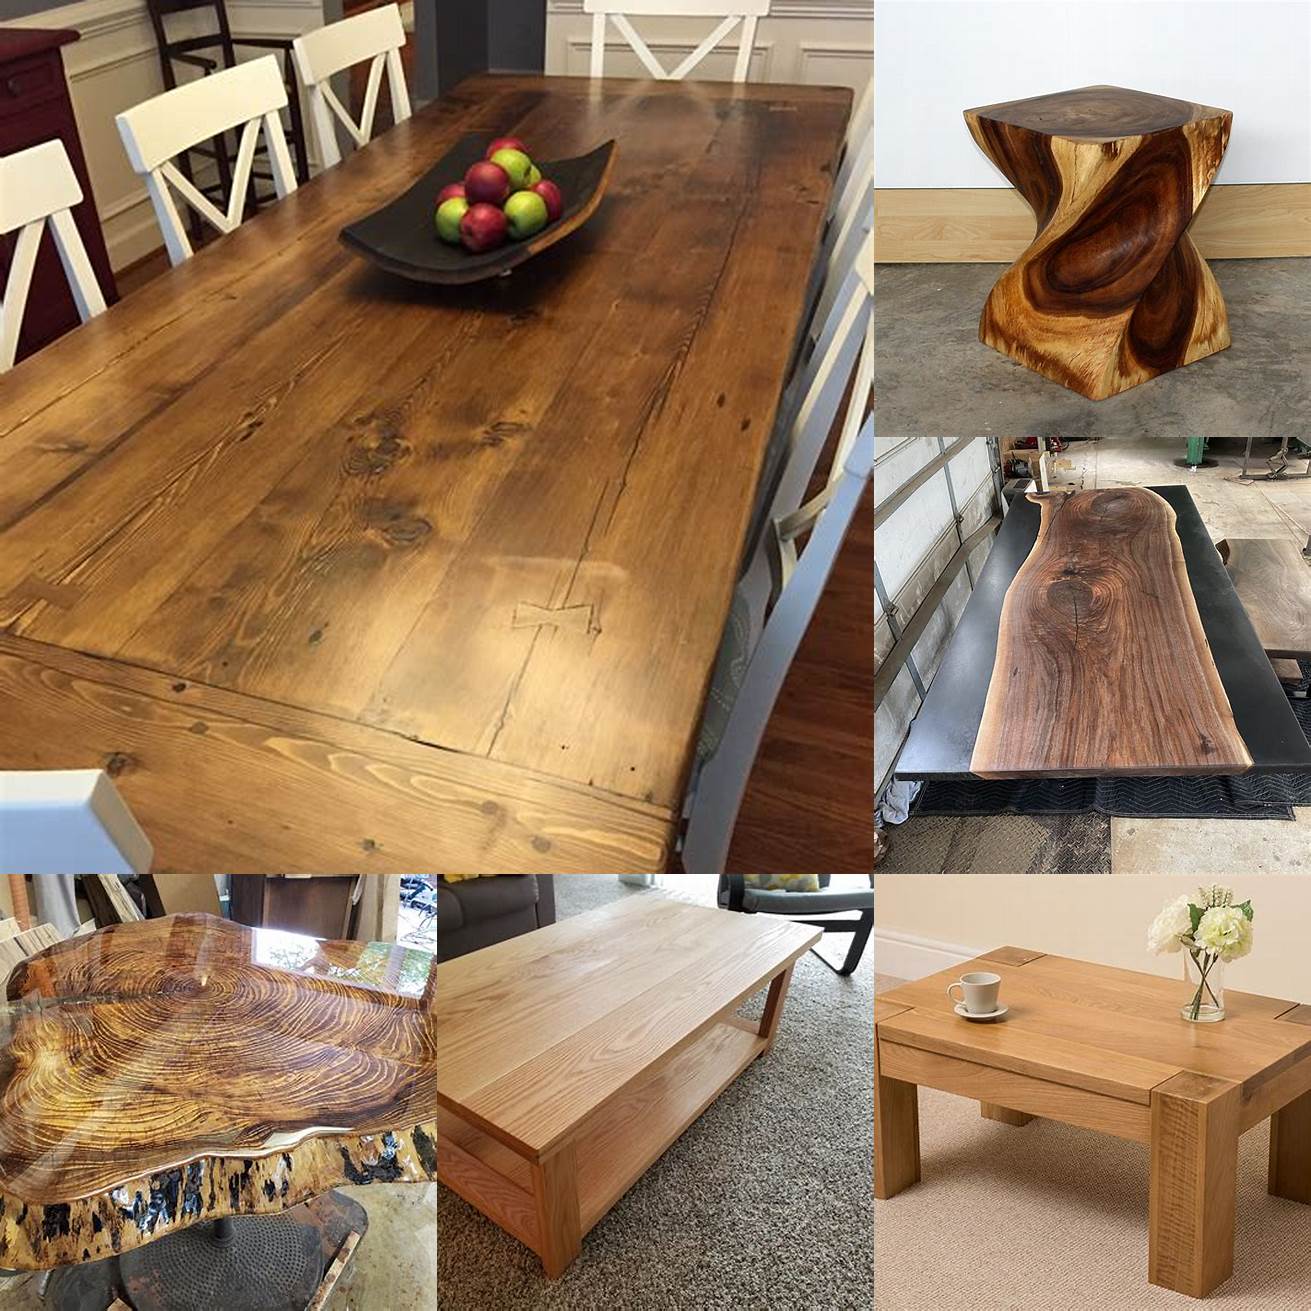 Oil wooden tables